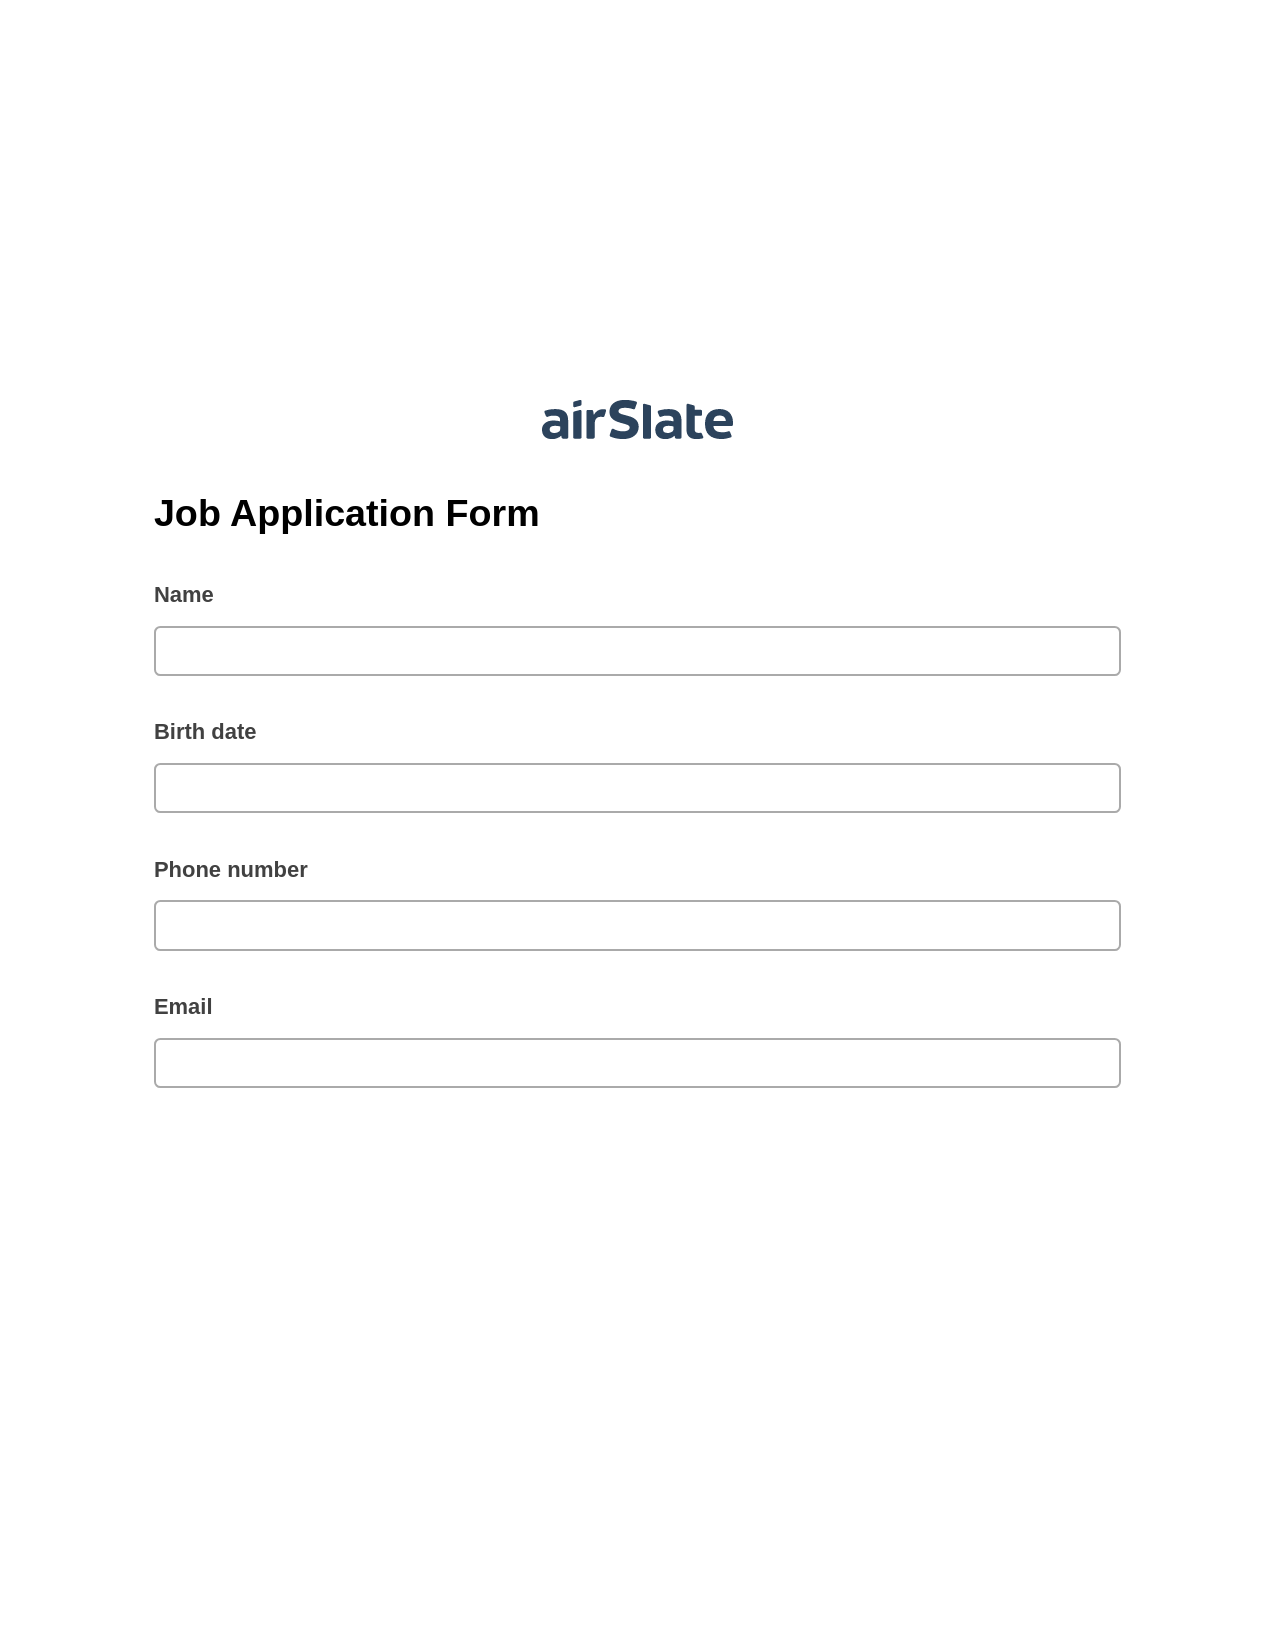 Job Application Form Pre-fill from Litmos bot, Export to MS Dynamics 365 Bot, Export to Salesforce Bot